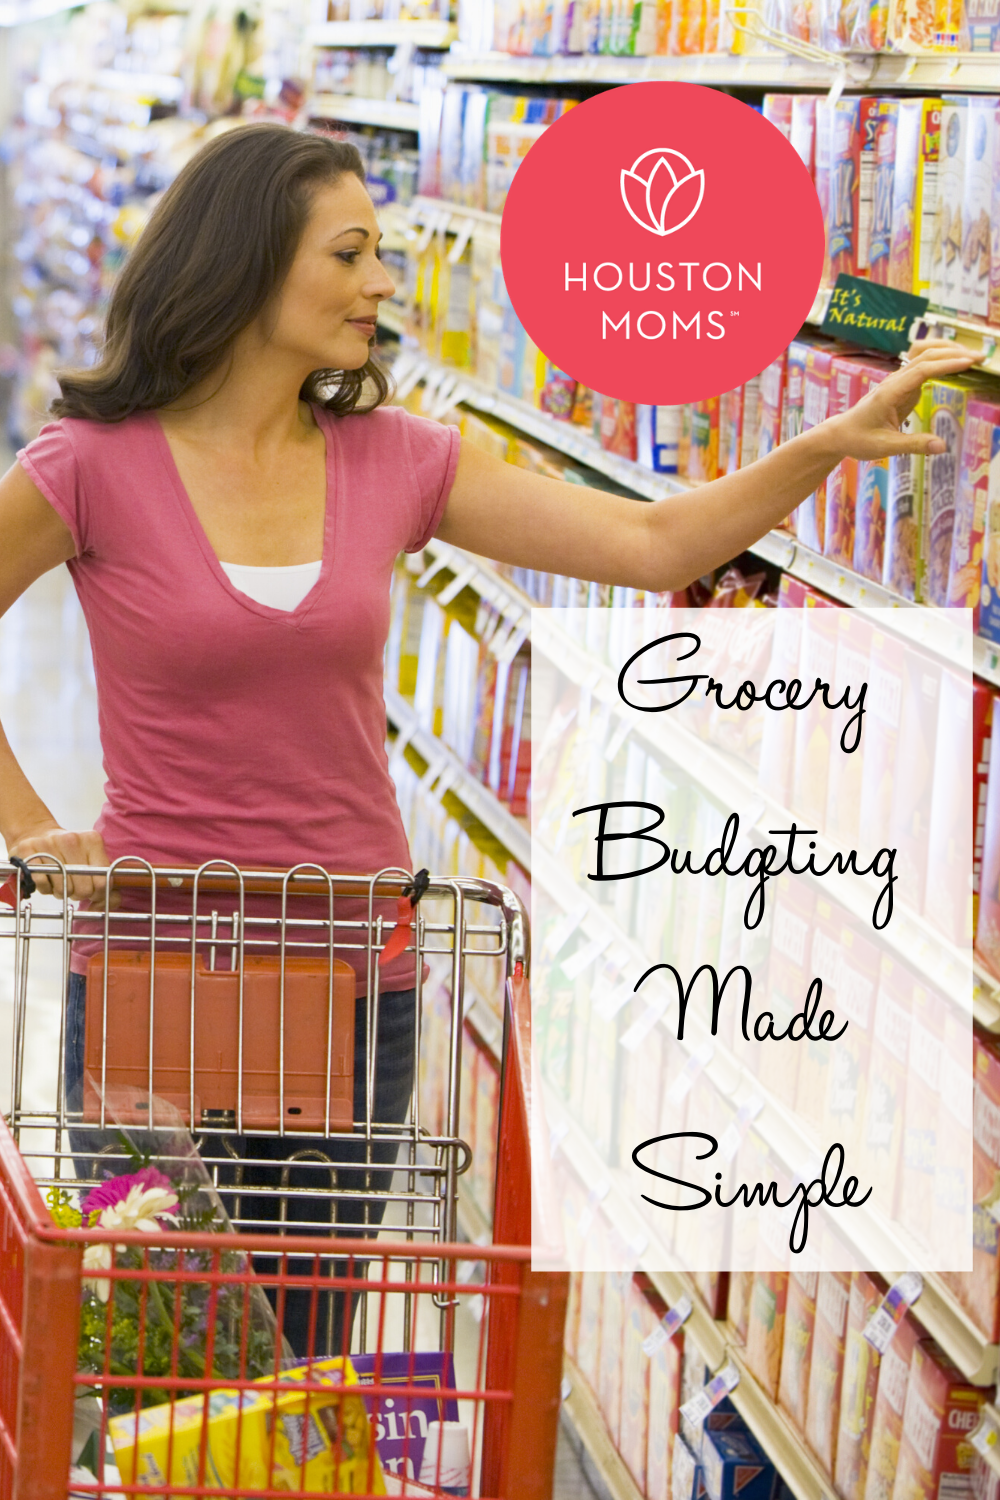 Houston Moms "Grocery Shopping Made Simple" #houstonmoms #houstonmomsblog #momsaroundhouston